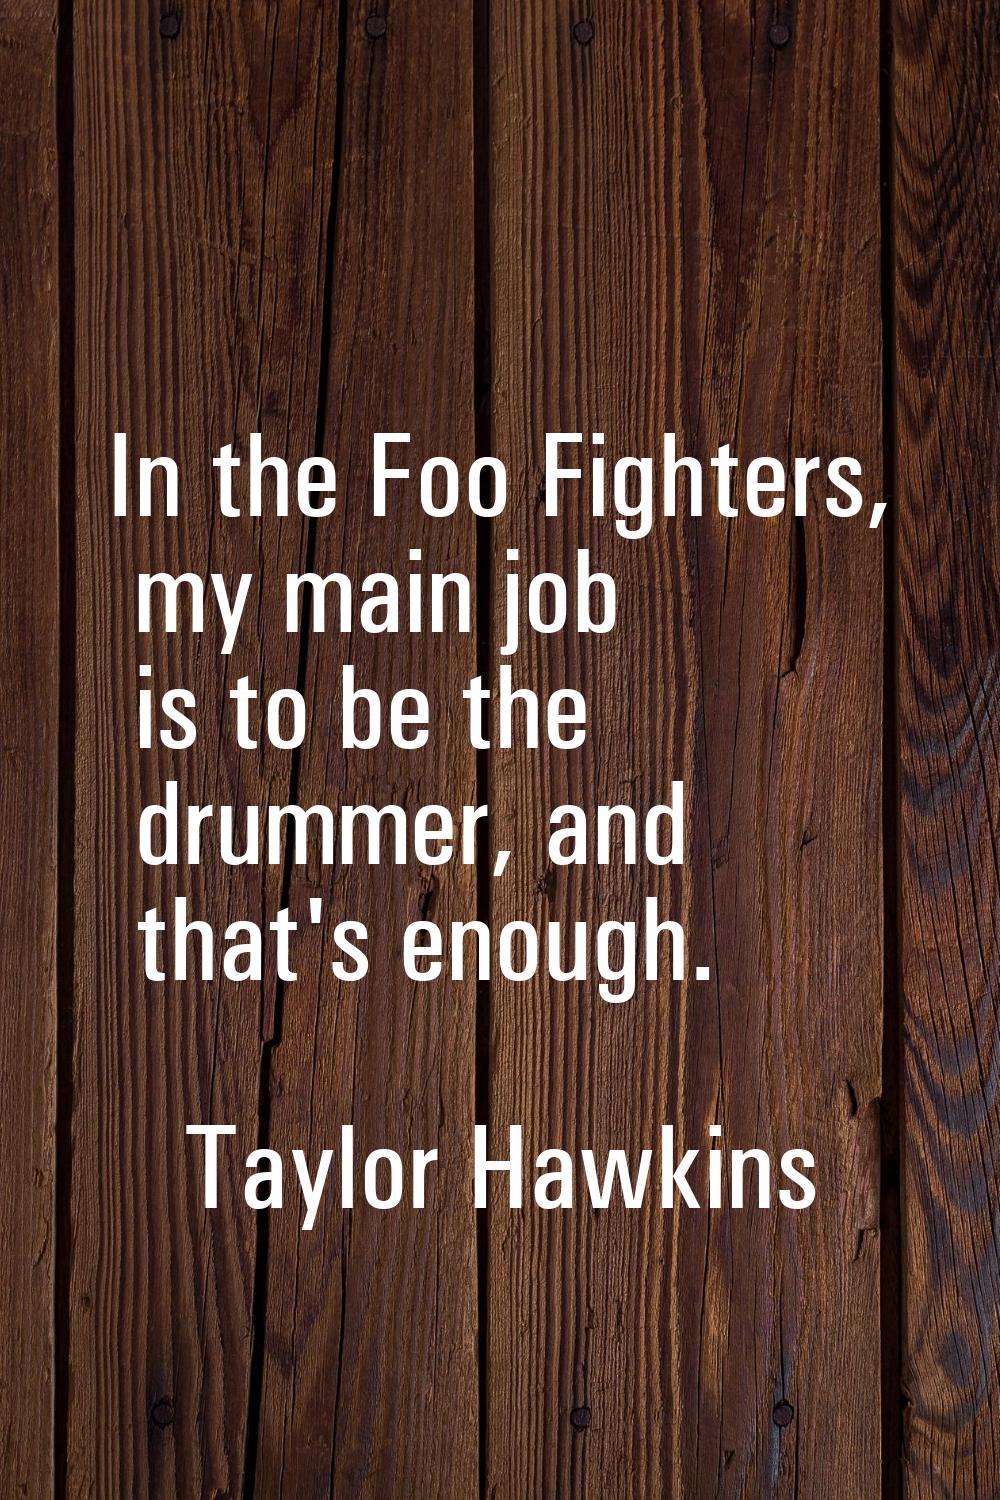 In the Foo Fighters, my main job is to be the drummer, and that's enough.